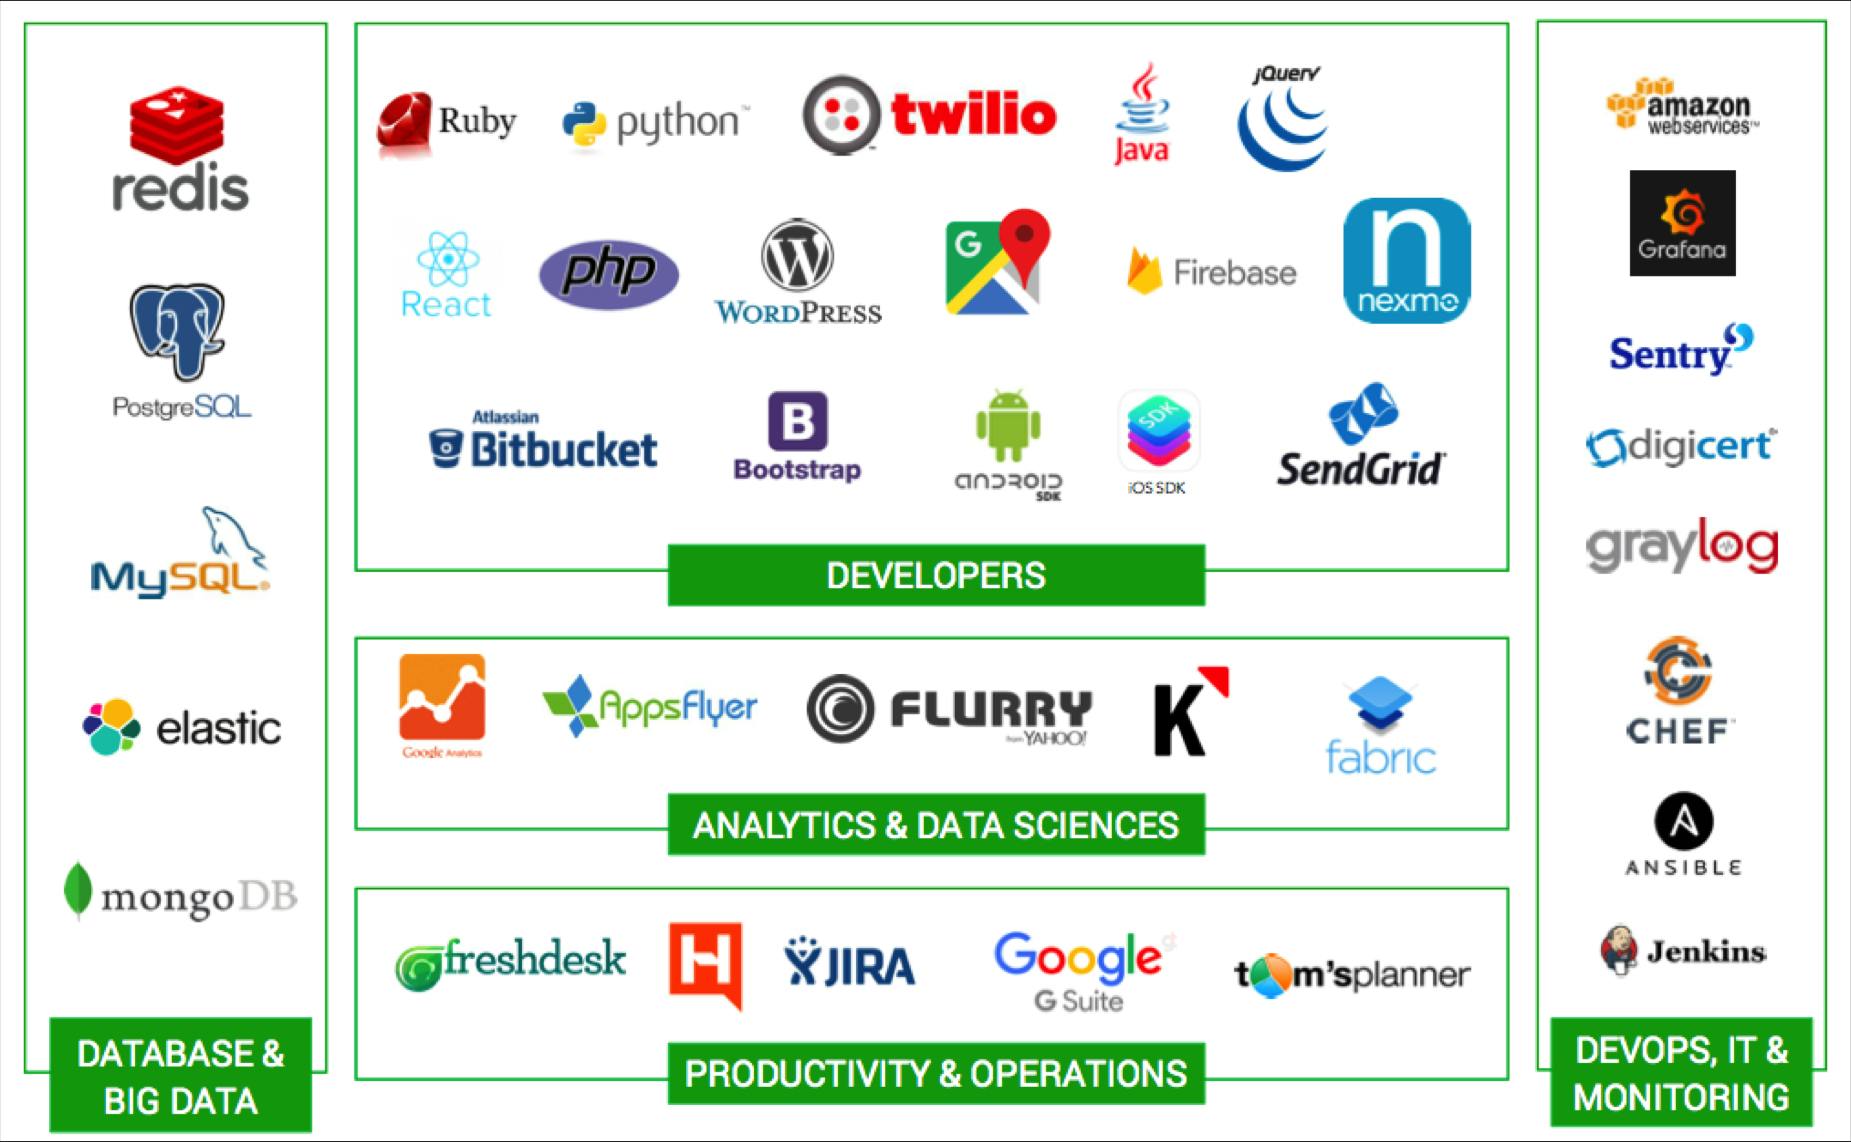 /how-a-first-time-cto-can-choose-the-right-techstack-for-their-startup-nc4m32uk feature image